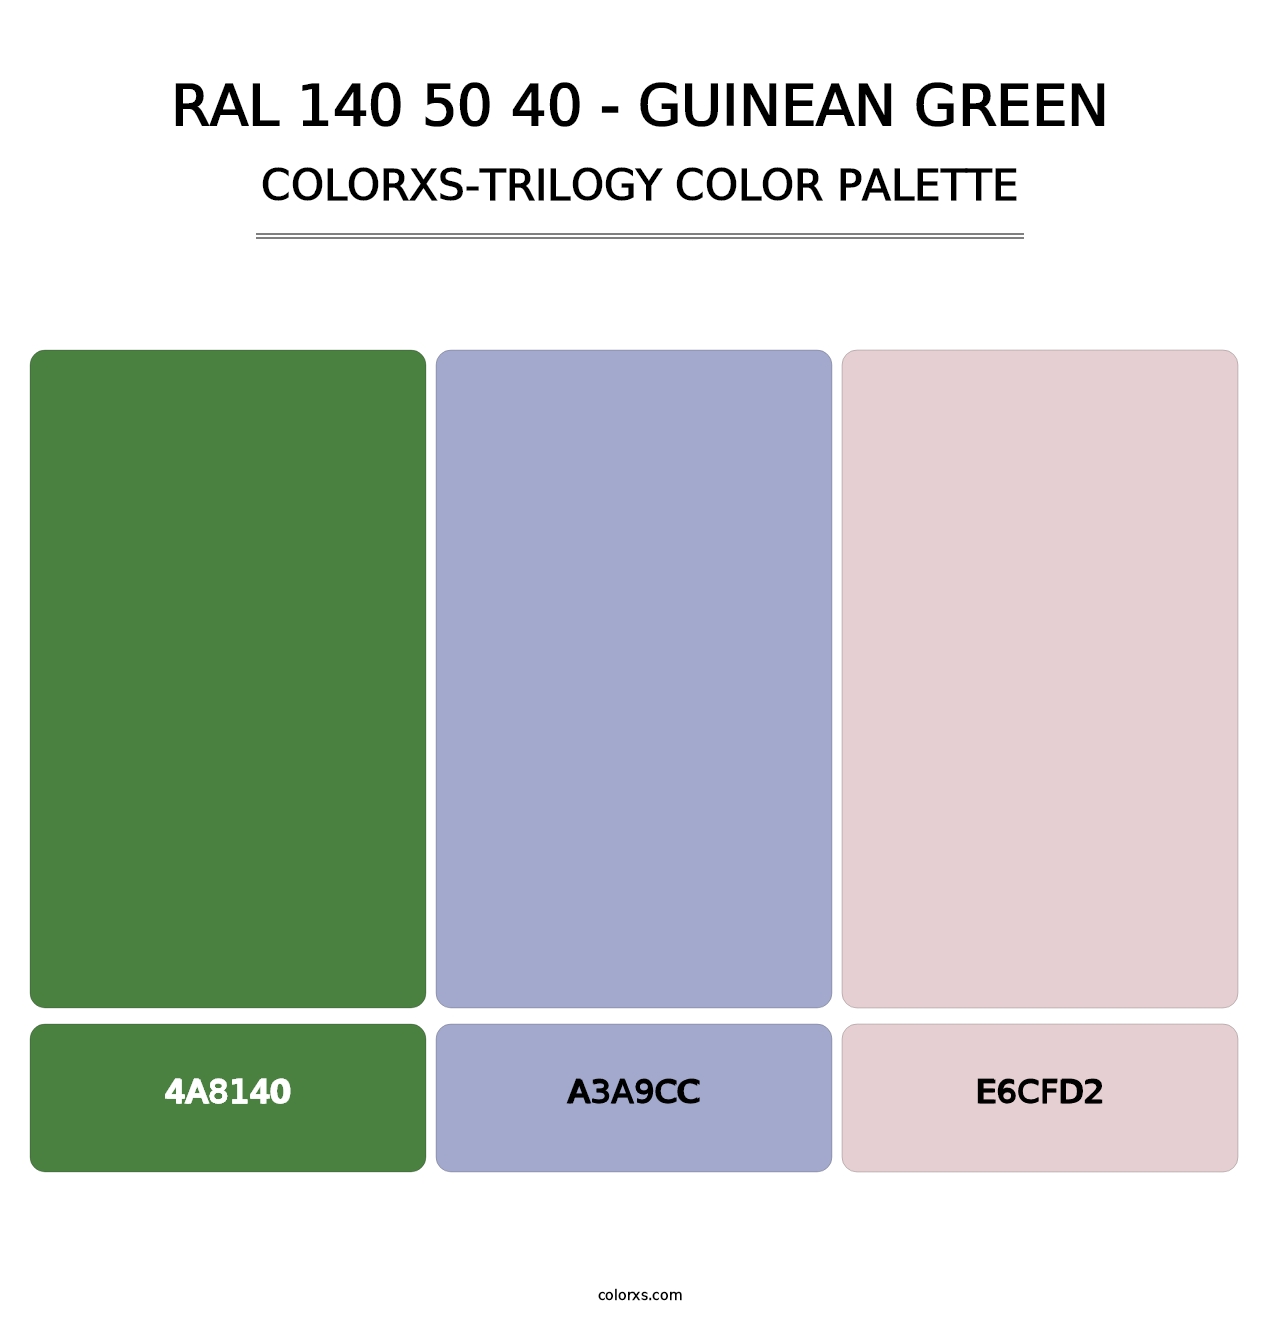 RAL 140 50 40 - Guinean Green - Colorxs Trilogy Palette